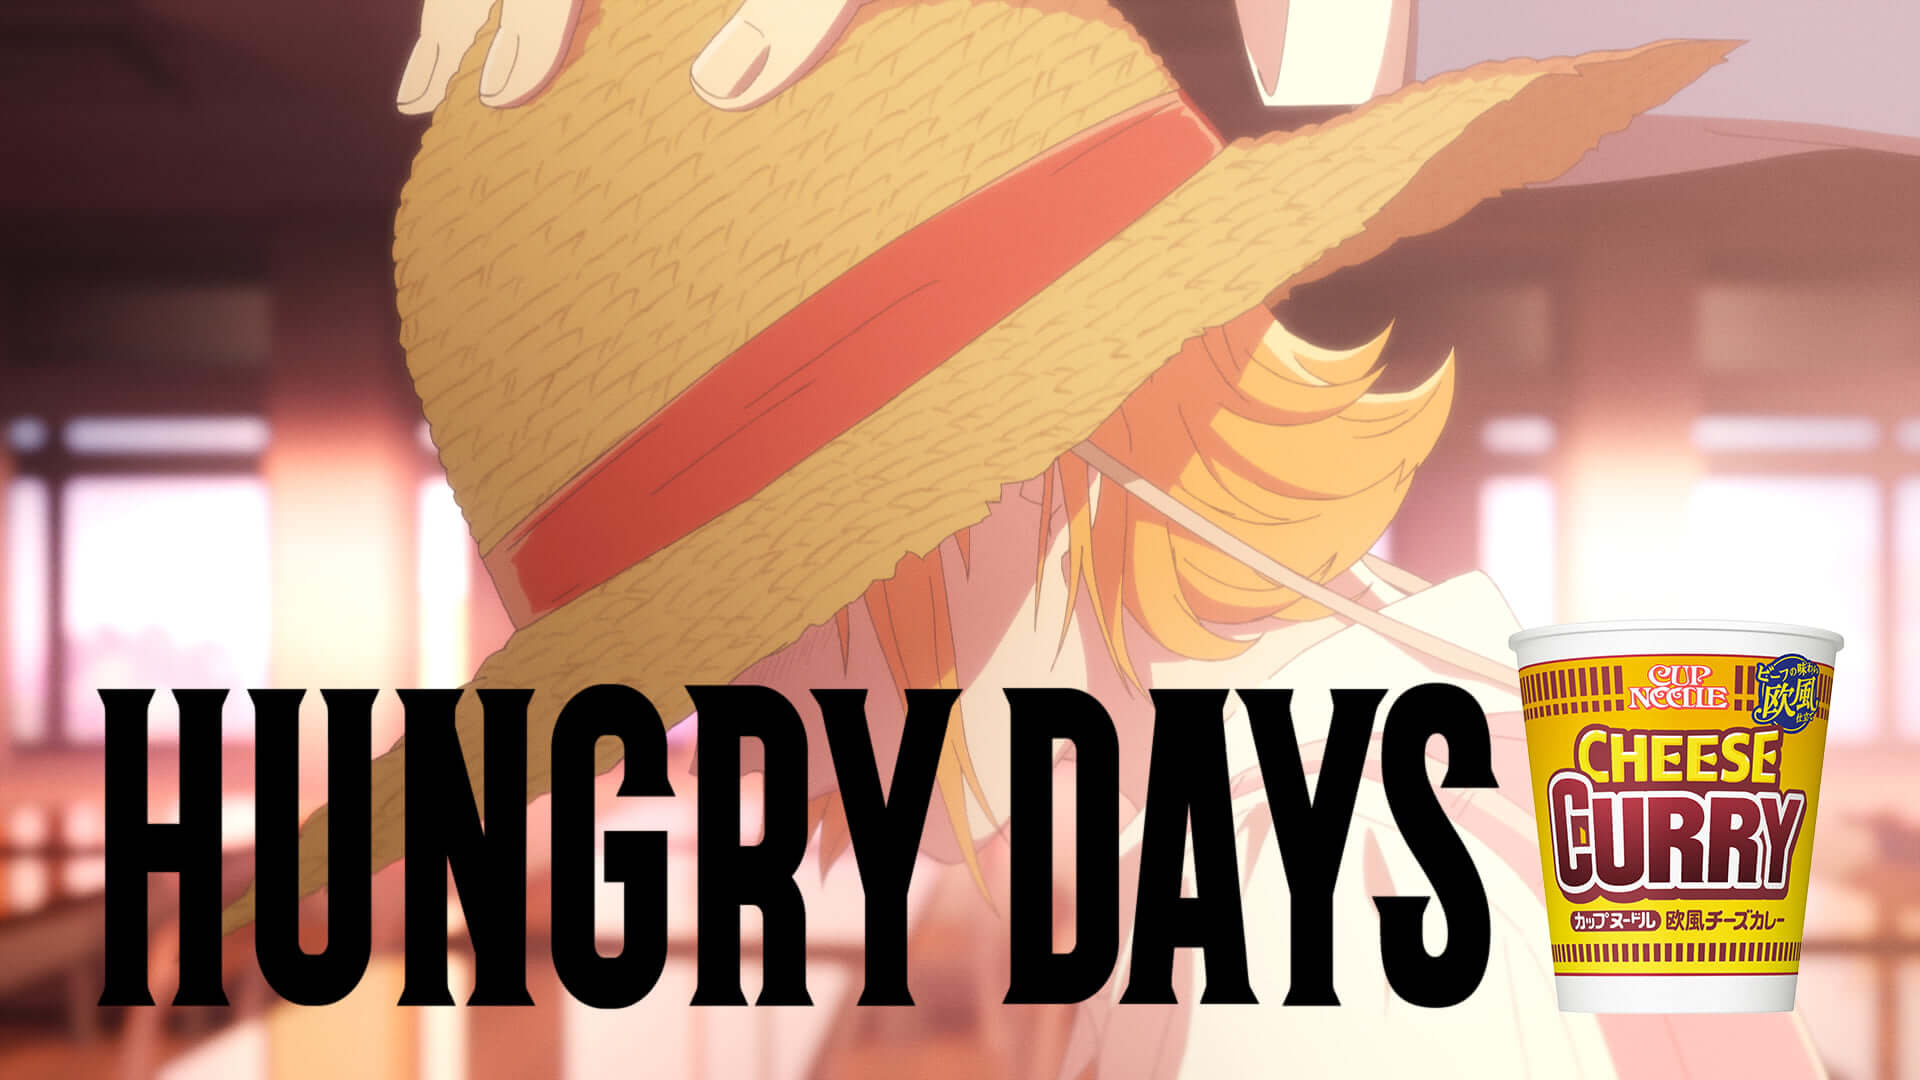 ONE PIECE、ナミの笑顔がまぶしい！カップヌードルCM「HUNGRY DAYS ワンピース ナミ篇」公開 art190913_onepiece_cupnoodle_8-1920x1080